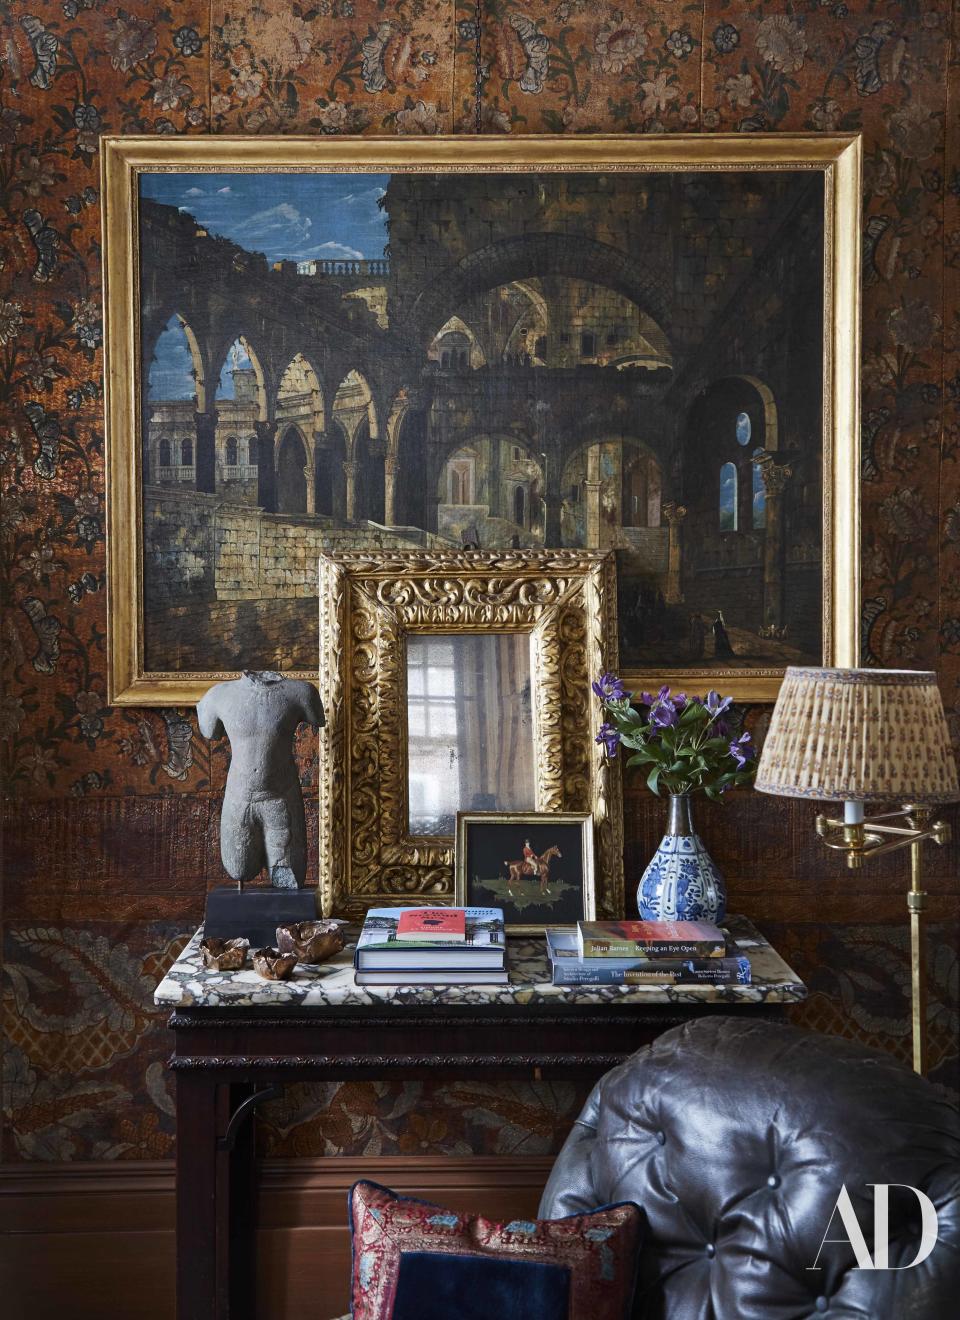 An 18th-century Venetian painting hangs over an 18th-century English table in the living room. Ancient Khmer bust; small brass bowls by Osanna Visconti; Louis XIV mirror; small 19th-century painting; 18th-century Chinese vase with Turkish silver neck.